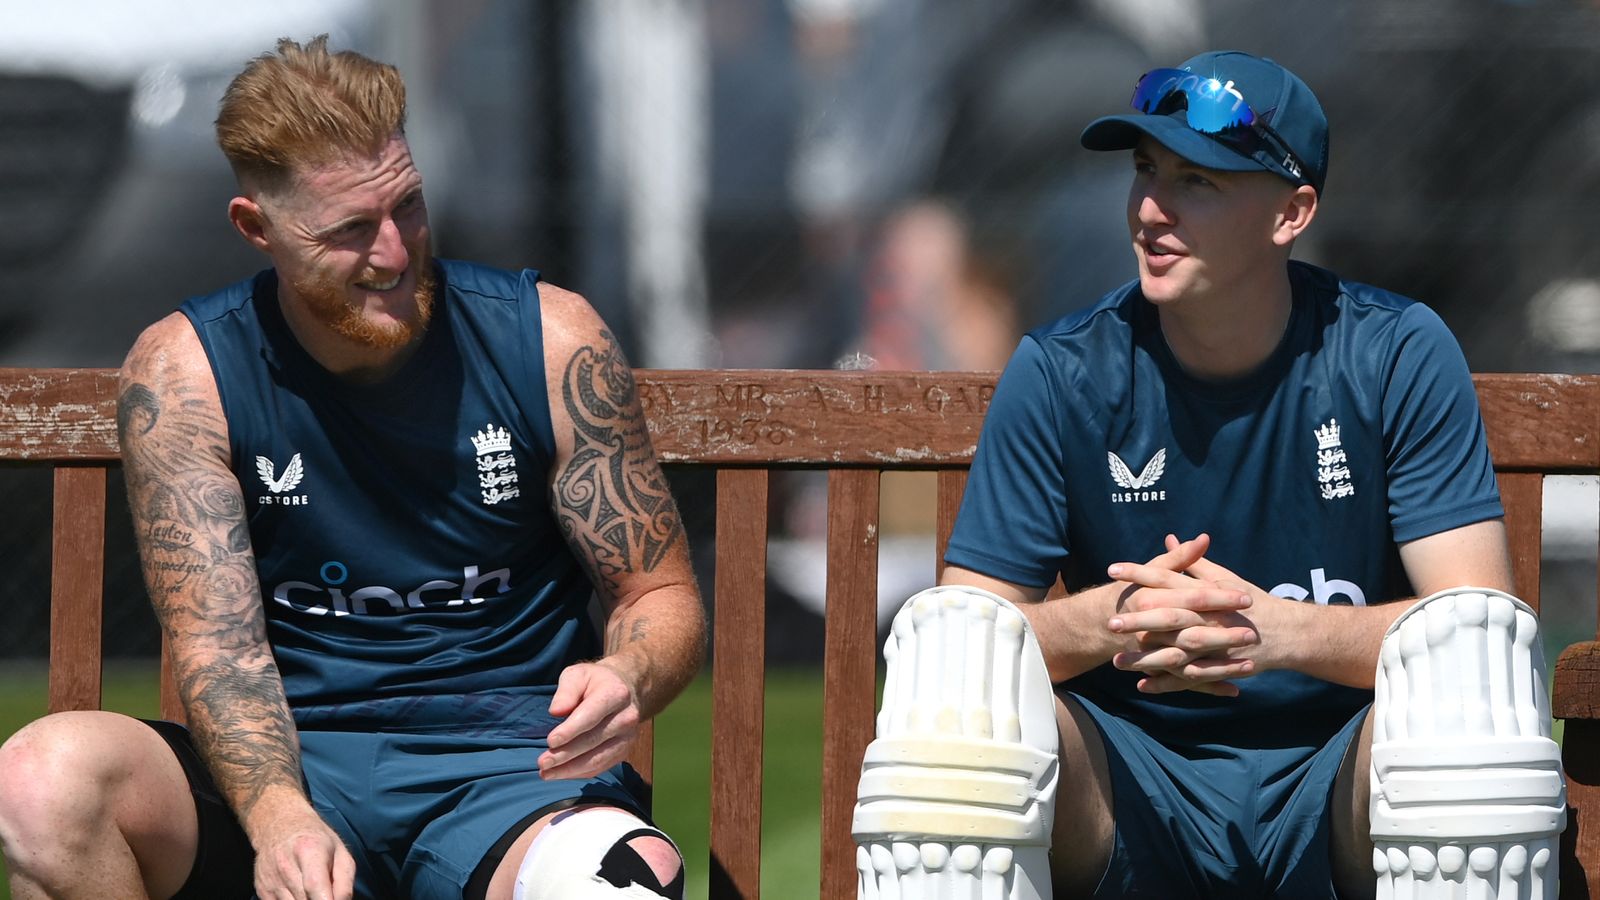 Ben Stokes: Michael Atherton on Harry Brook being ‘the unlucky one’ and Stokes’ return to England ODI squad | Cricket News thumbnail